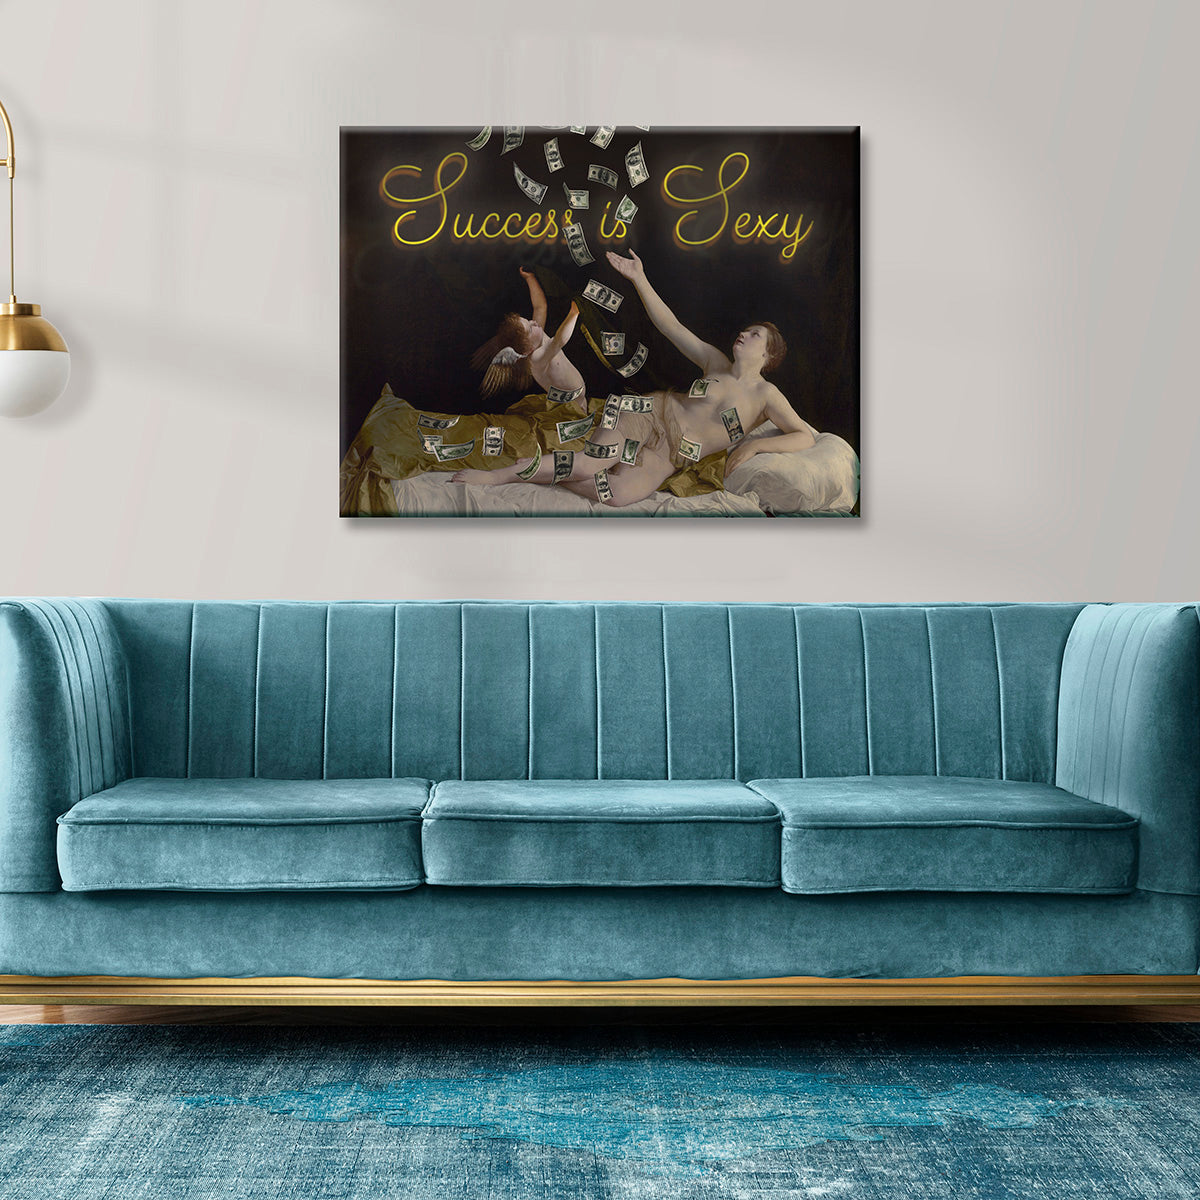 "Success is Sexy" canvas print